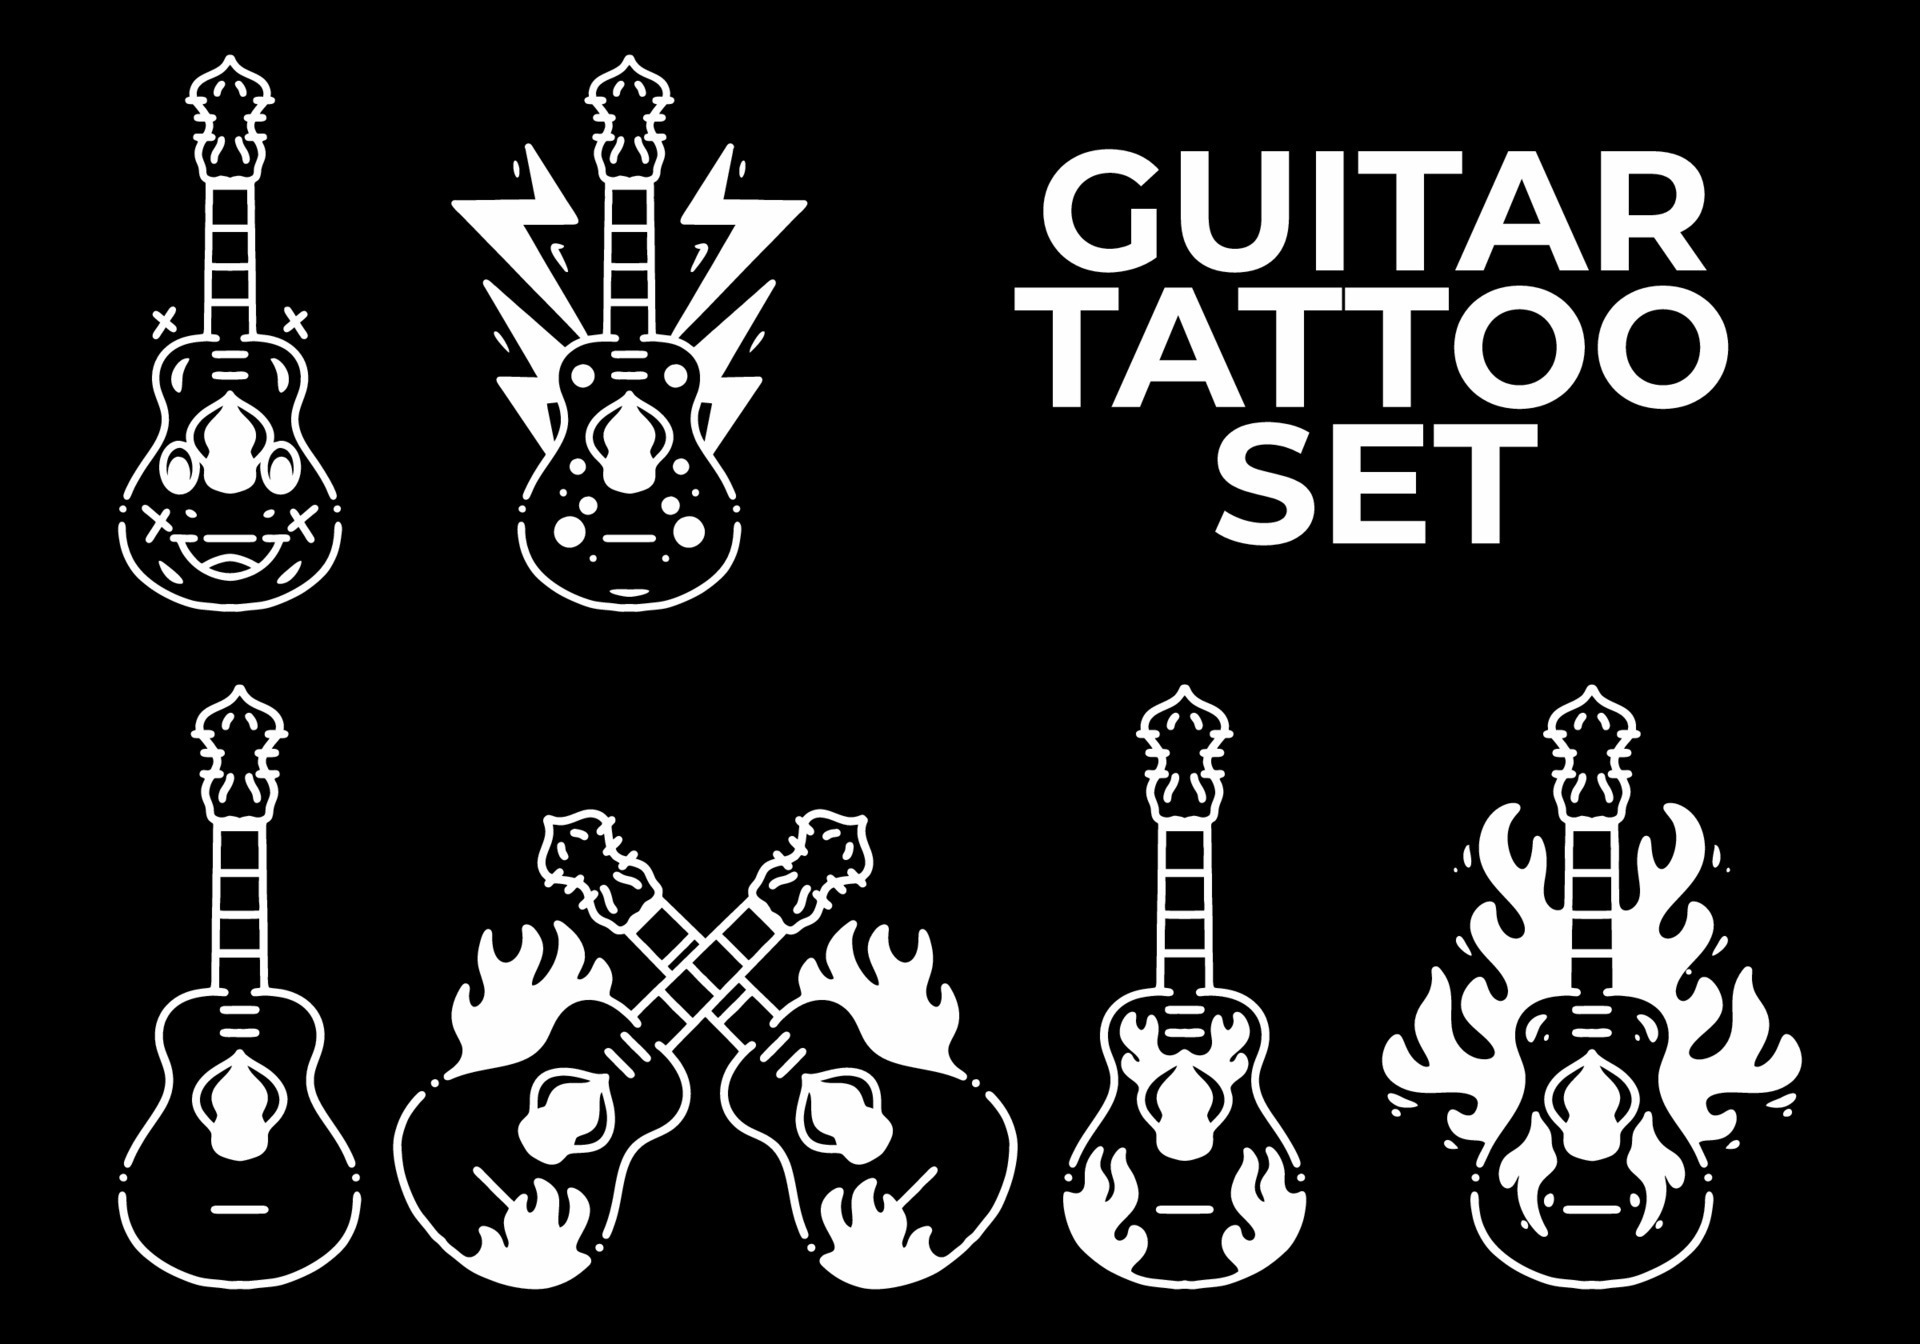 Pin Bass Clef Clip Art - Bass Guitar Tattoo Designs Transparent PNG -  442x800 - Free Download on NicePNG